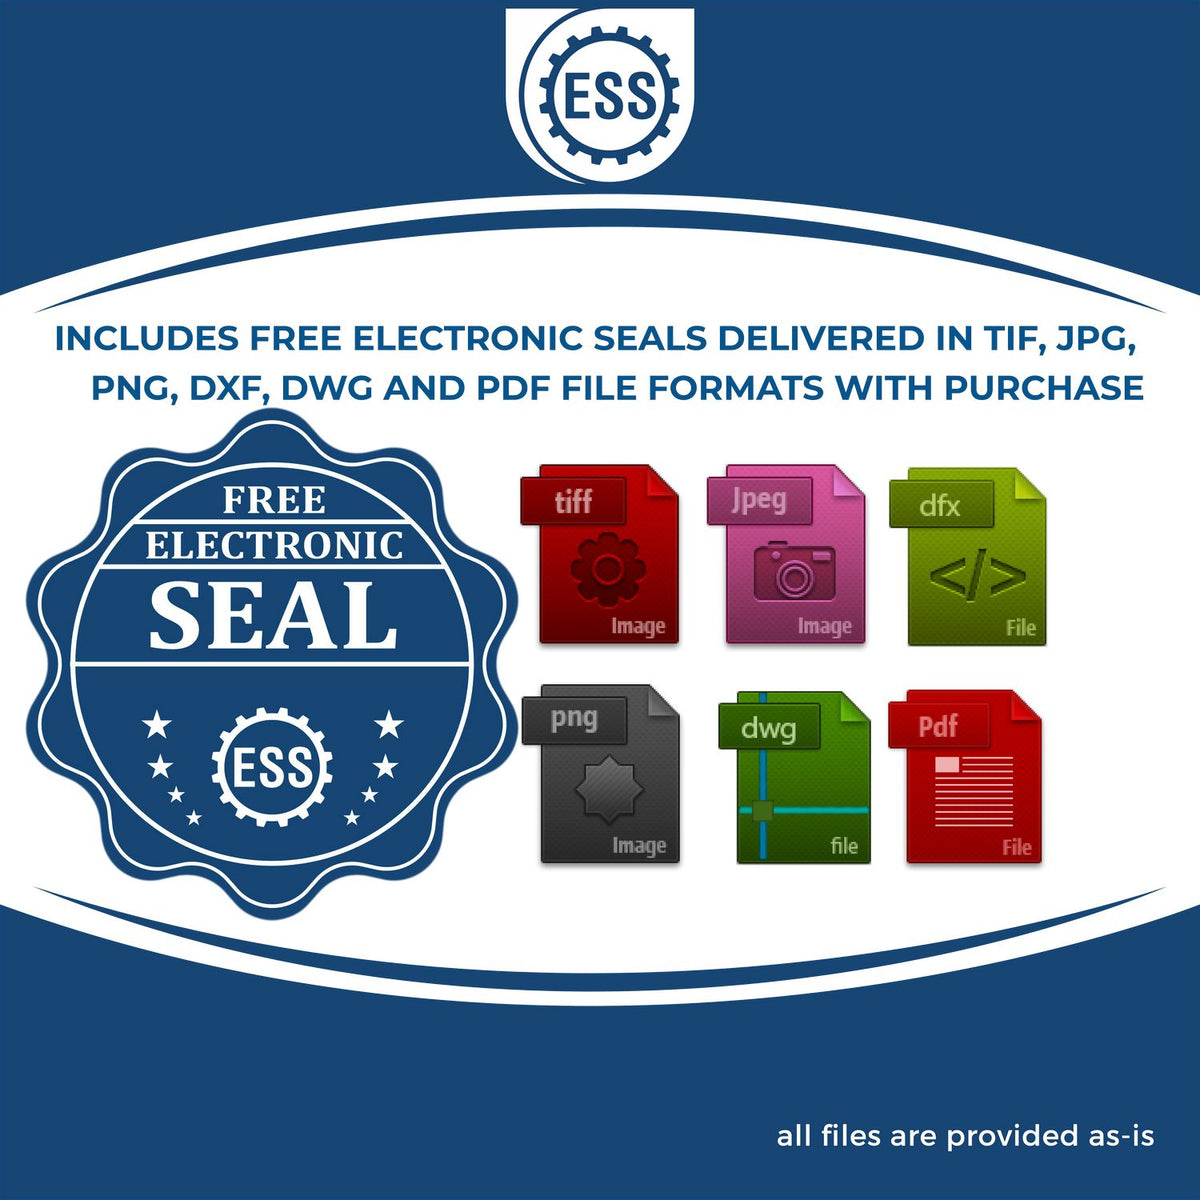 An infographic for the free electronic seal for the Illinois Geologist Desk Seal illustrating the different file type icons such as DXF, DWG, TIF, JPG and PNG.